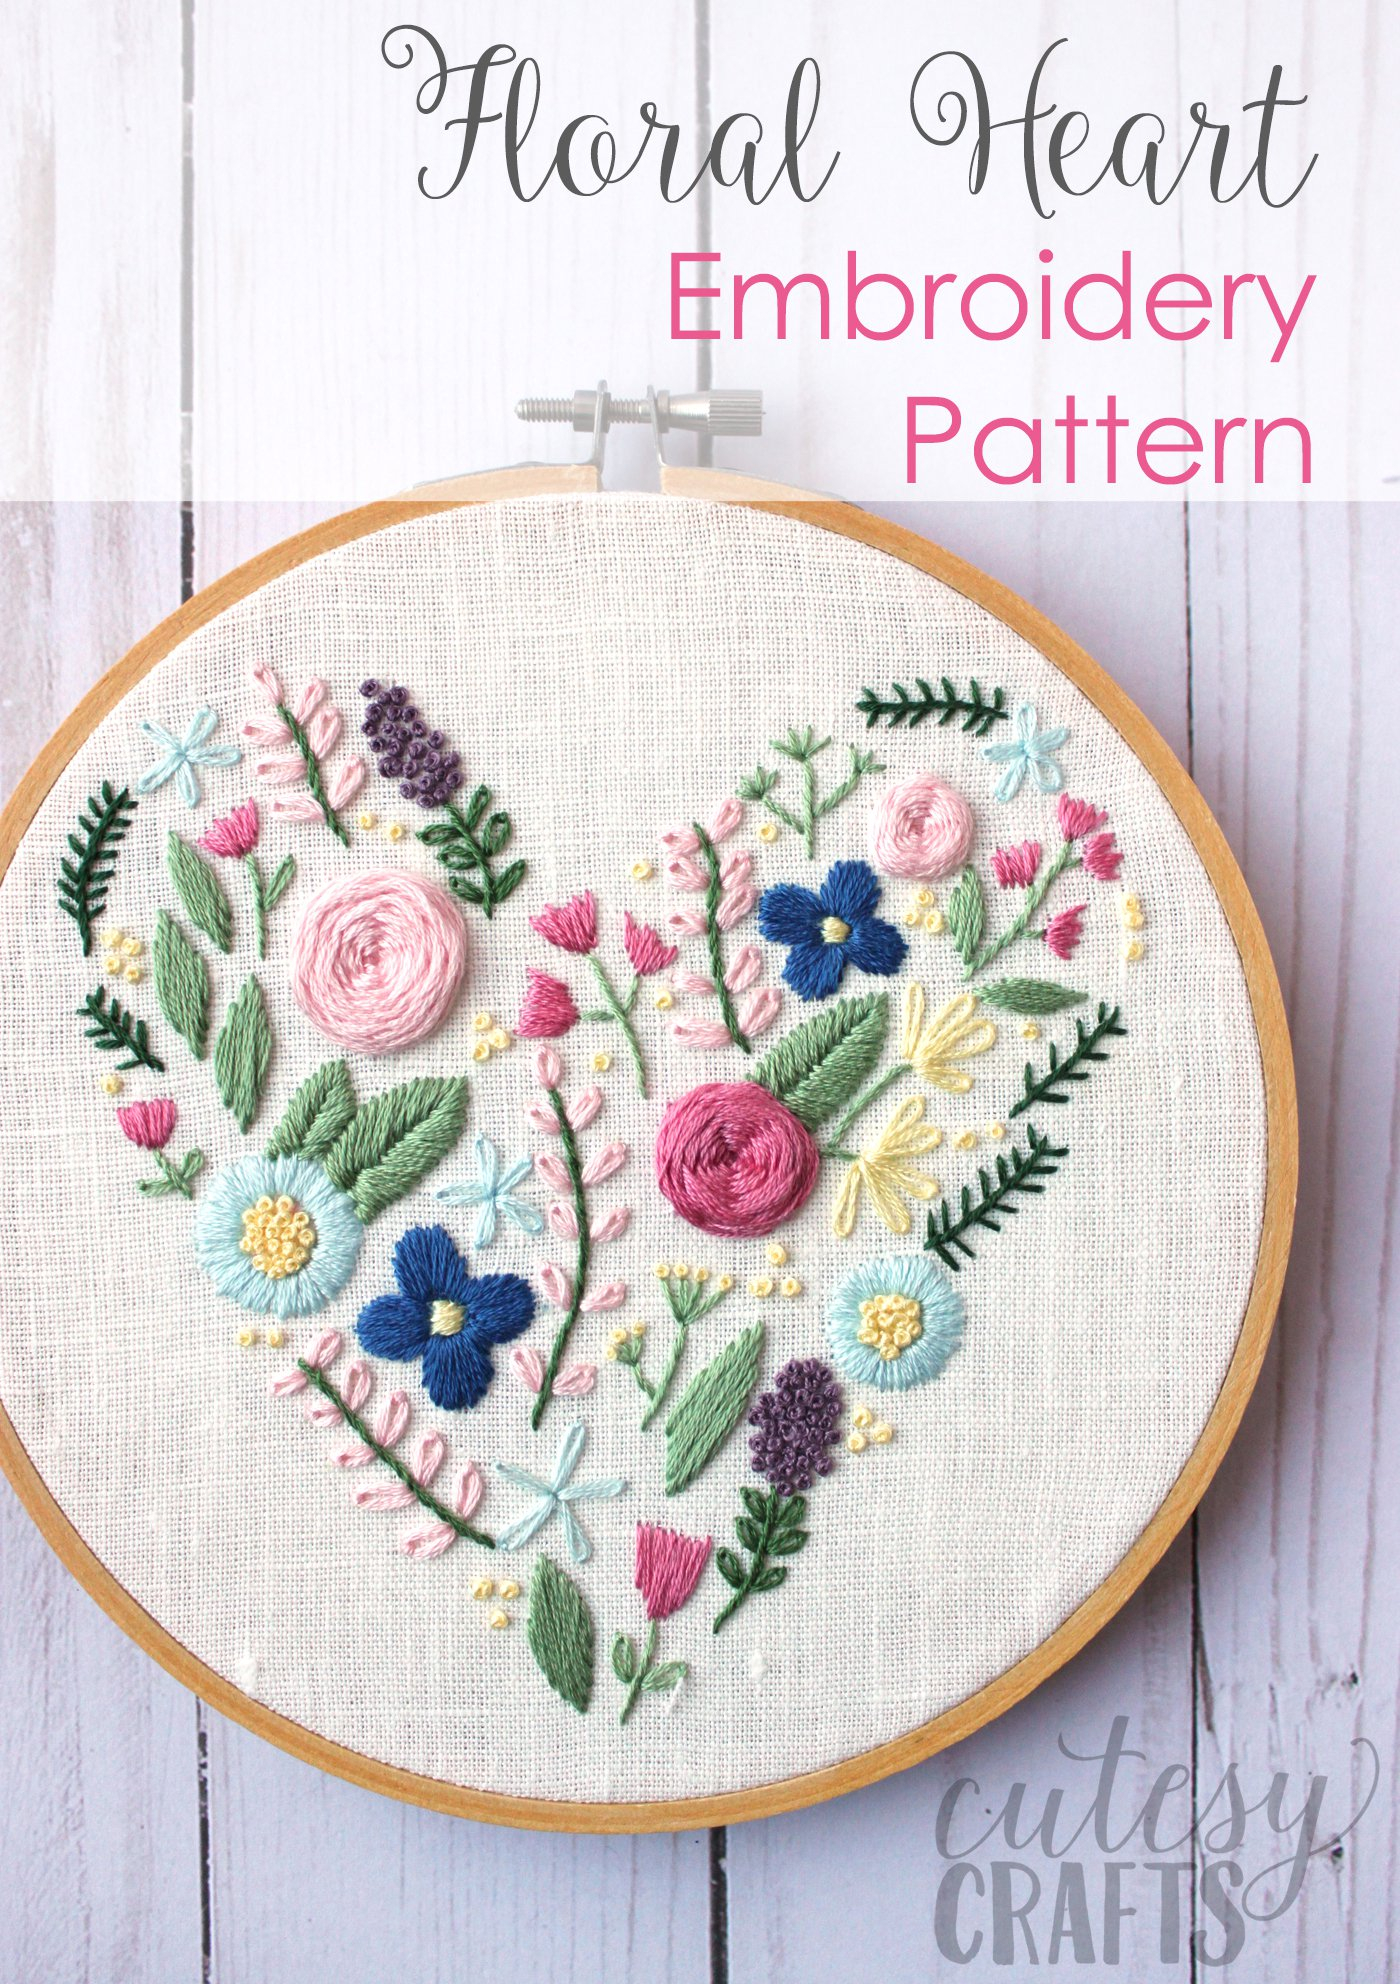 Embroidery Pattern Floral Heart Hand Embroidery Pattern The Polka Dot Chair